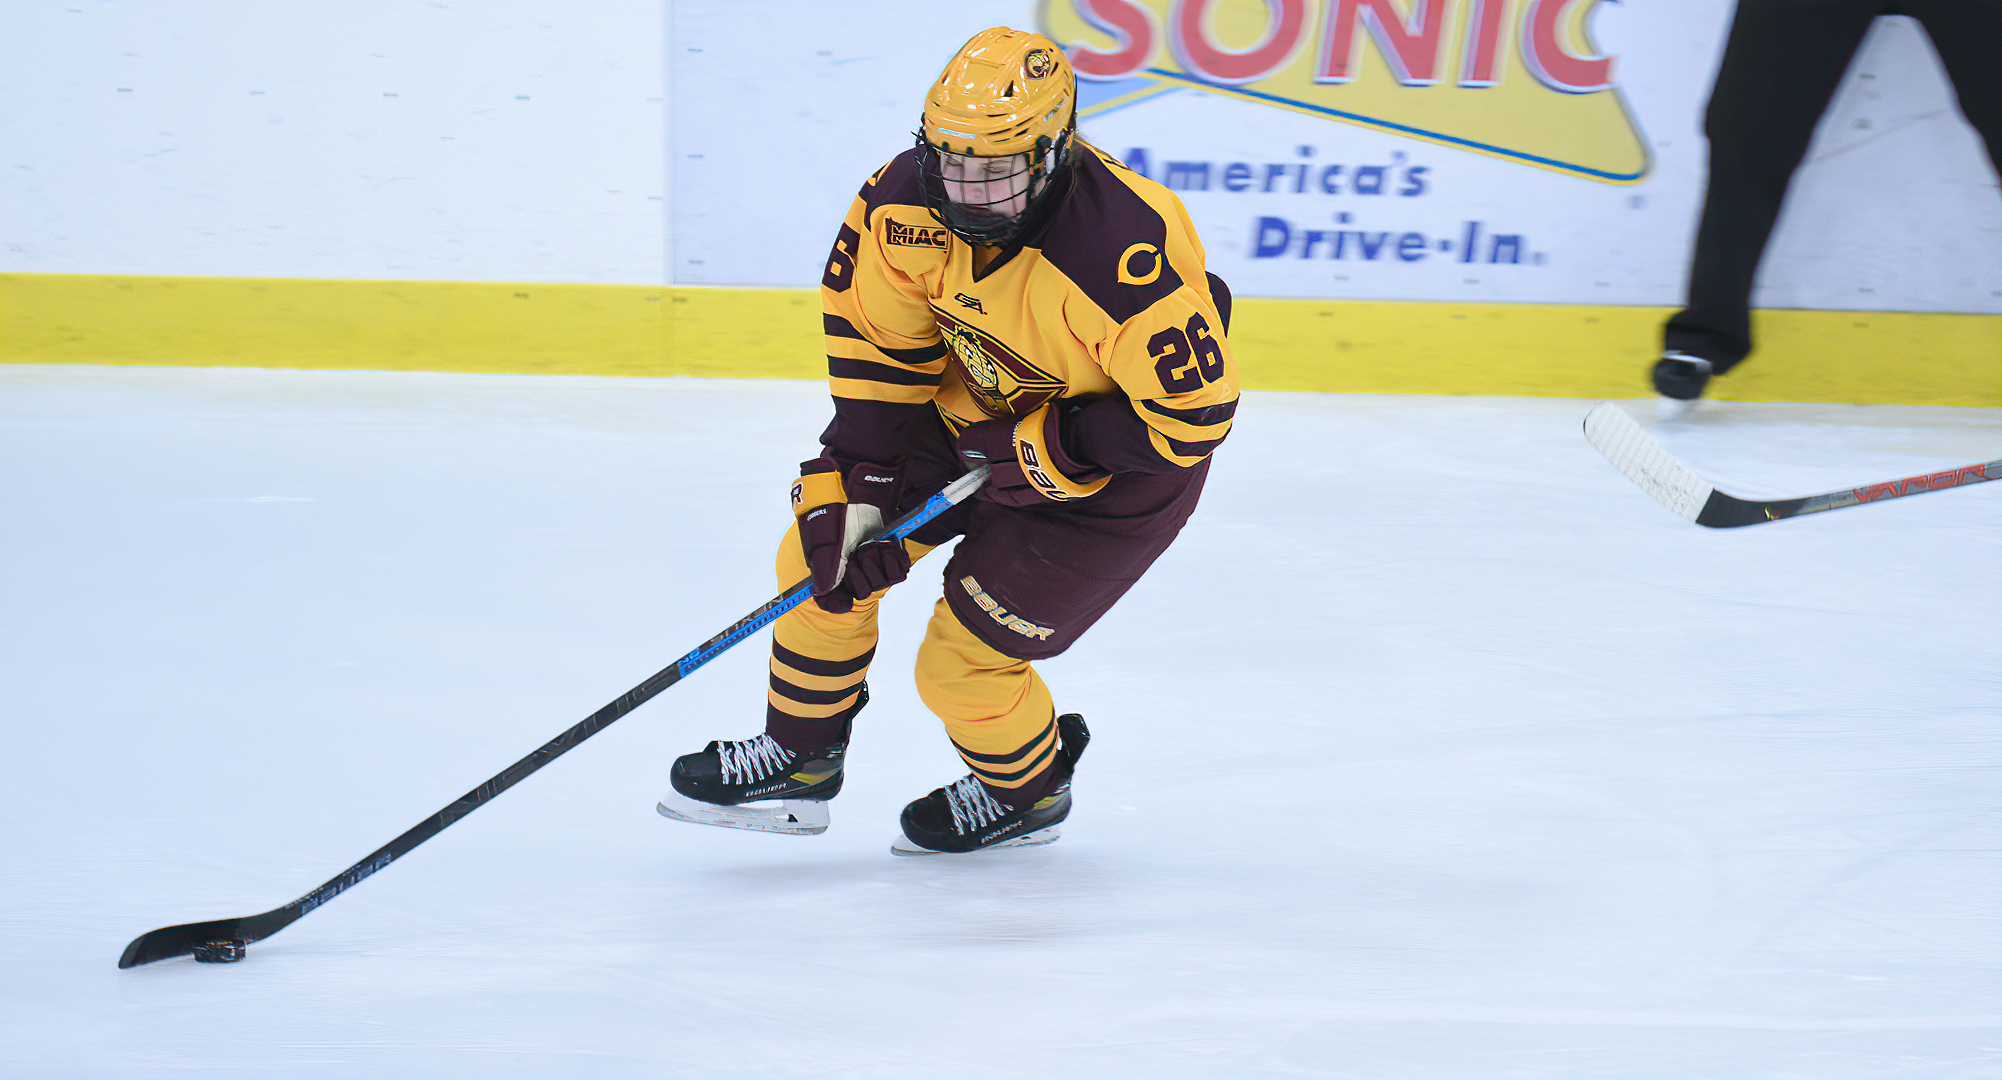 Sophomore Josie Hell scored the game-tying goal in the second minute of the third period in the Cobbers' game at #5 Wis.-River Falls.